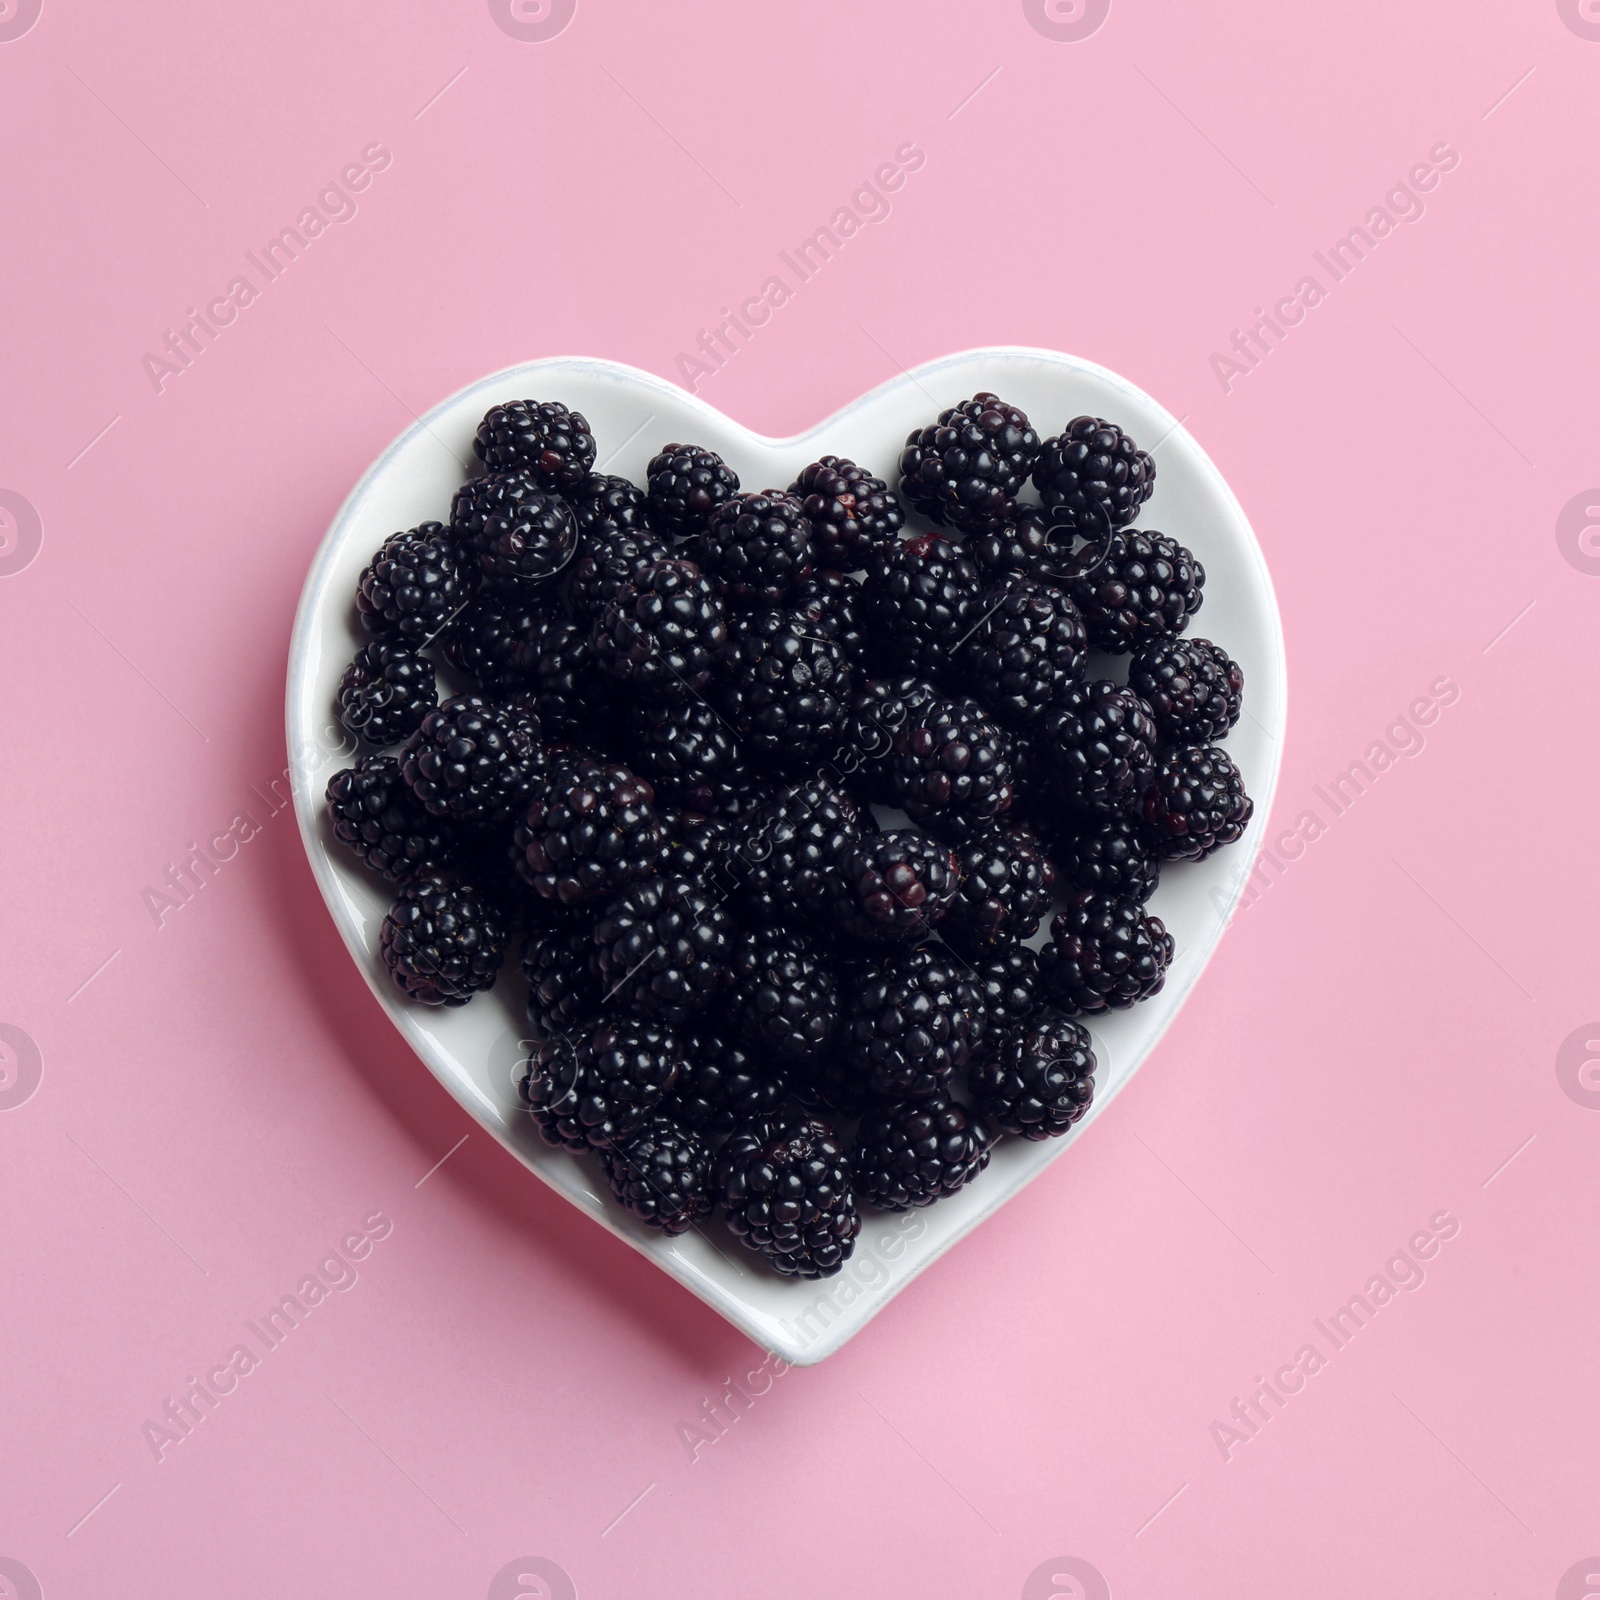 Photo of Heart shaped plate of ripe blackberries on pink background, top view